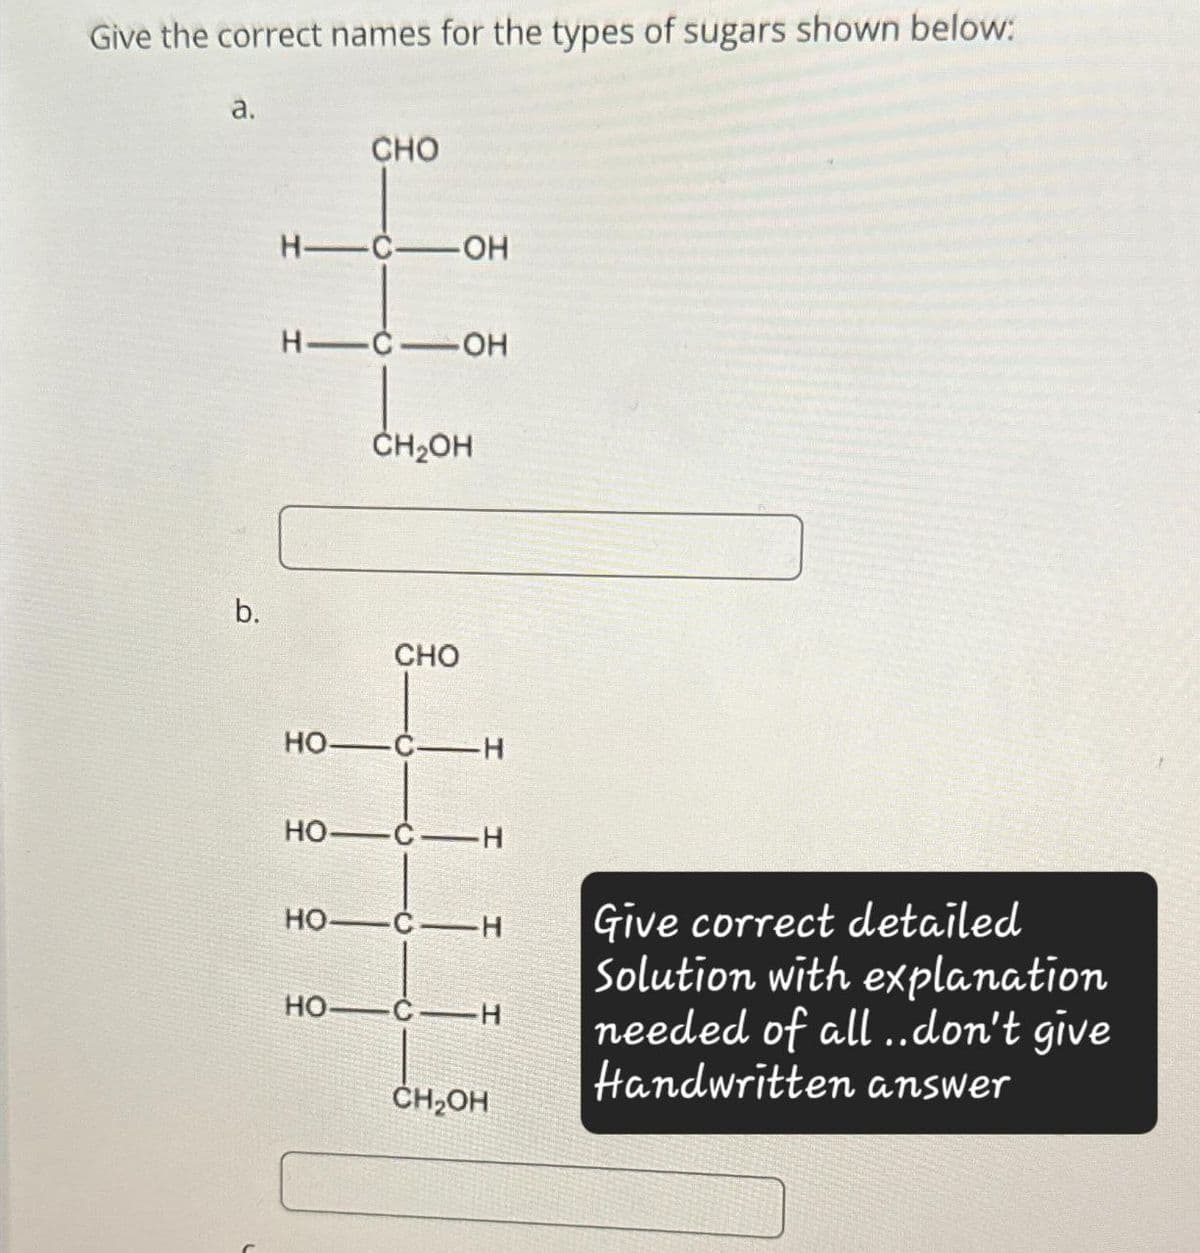 Give the correct names for the types of sugars shown below:
a.
CHO
H-C-OH
H-C-OH
CH₂OH
b.
CHO
HO
C-H
HO C-H
HO
C-H
CH₂OH
Give correct detailed
Solution with explanation
needed of all..don't give
Handwritten answer